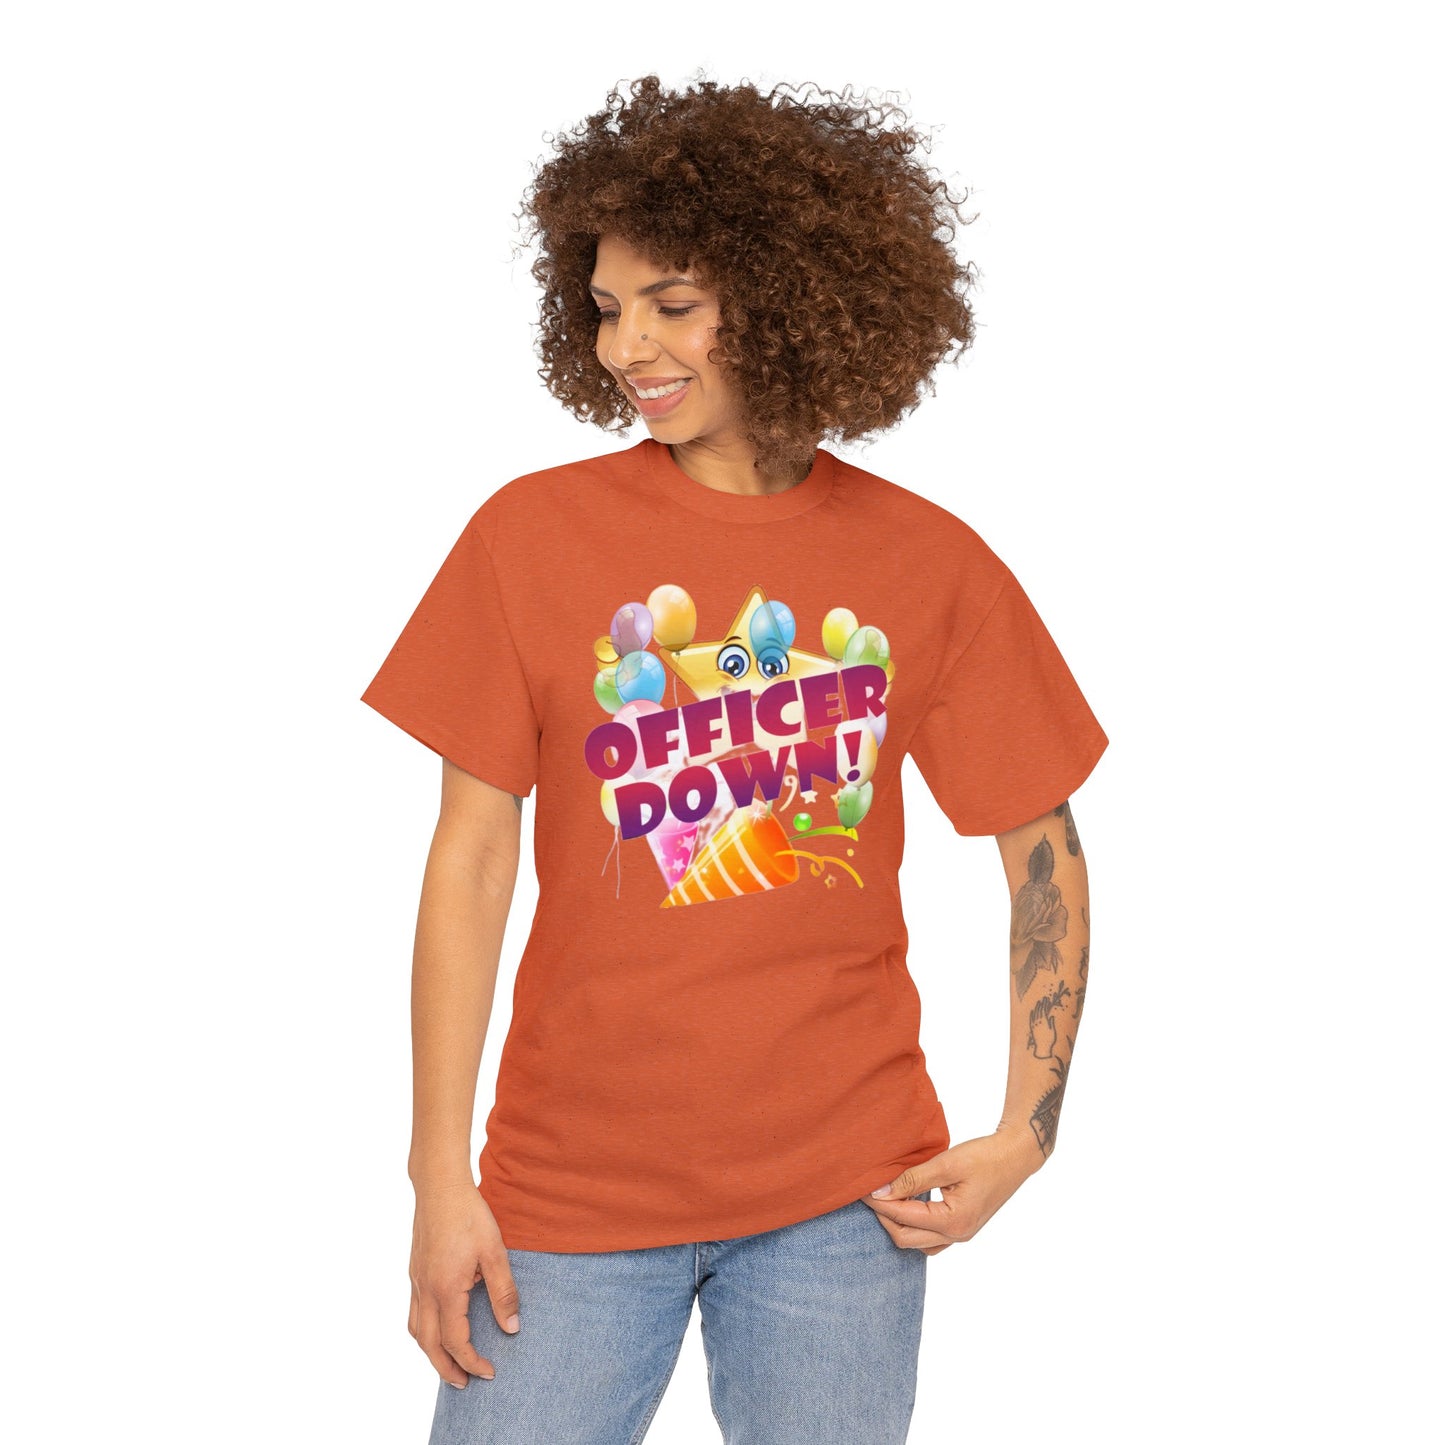 Officer Down! Tee